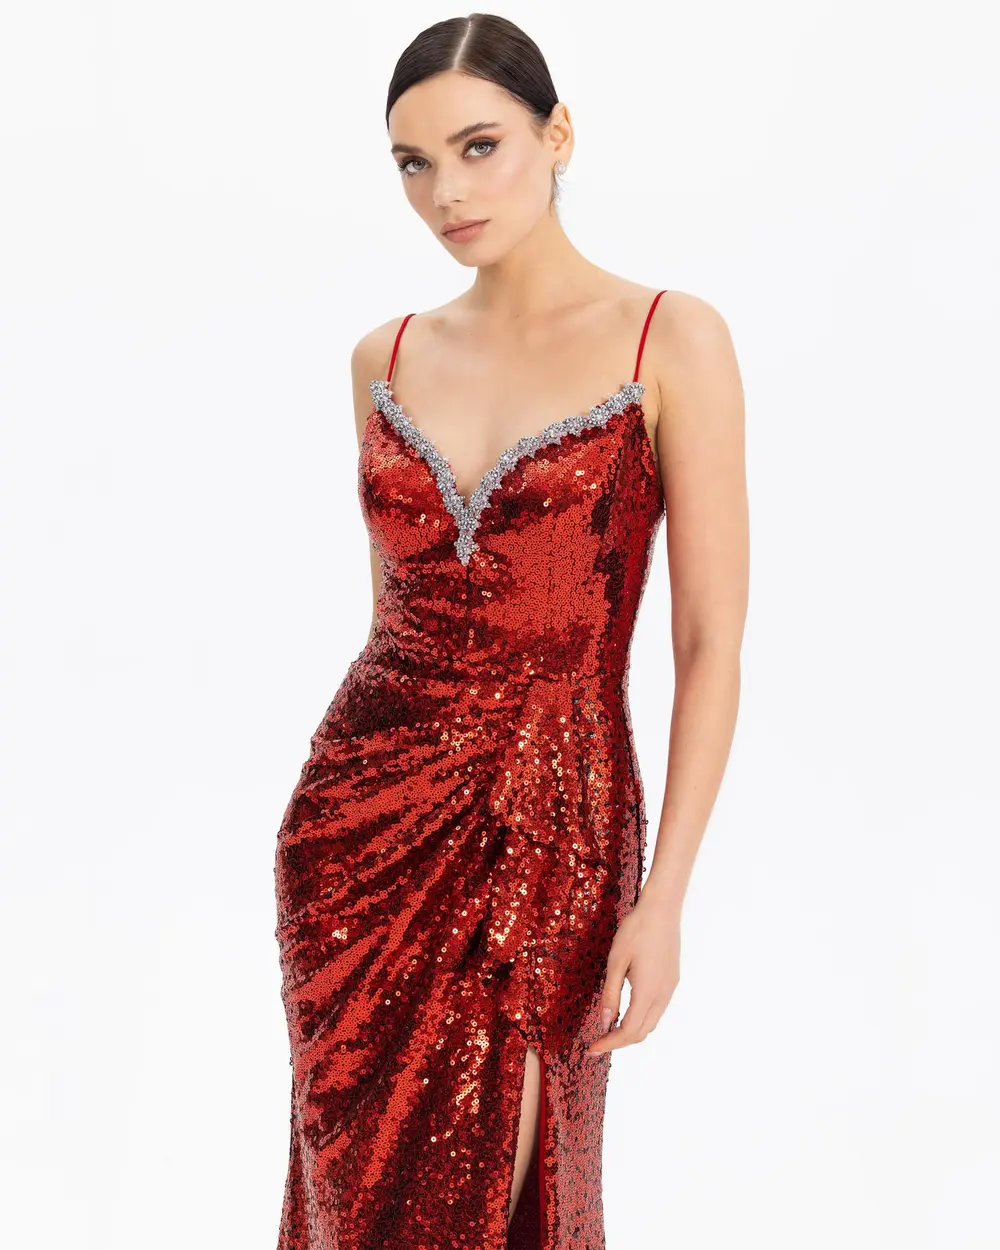  STONE EMBROIDERED SEQUIN EVENING DRESS